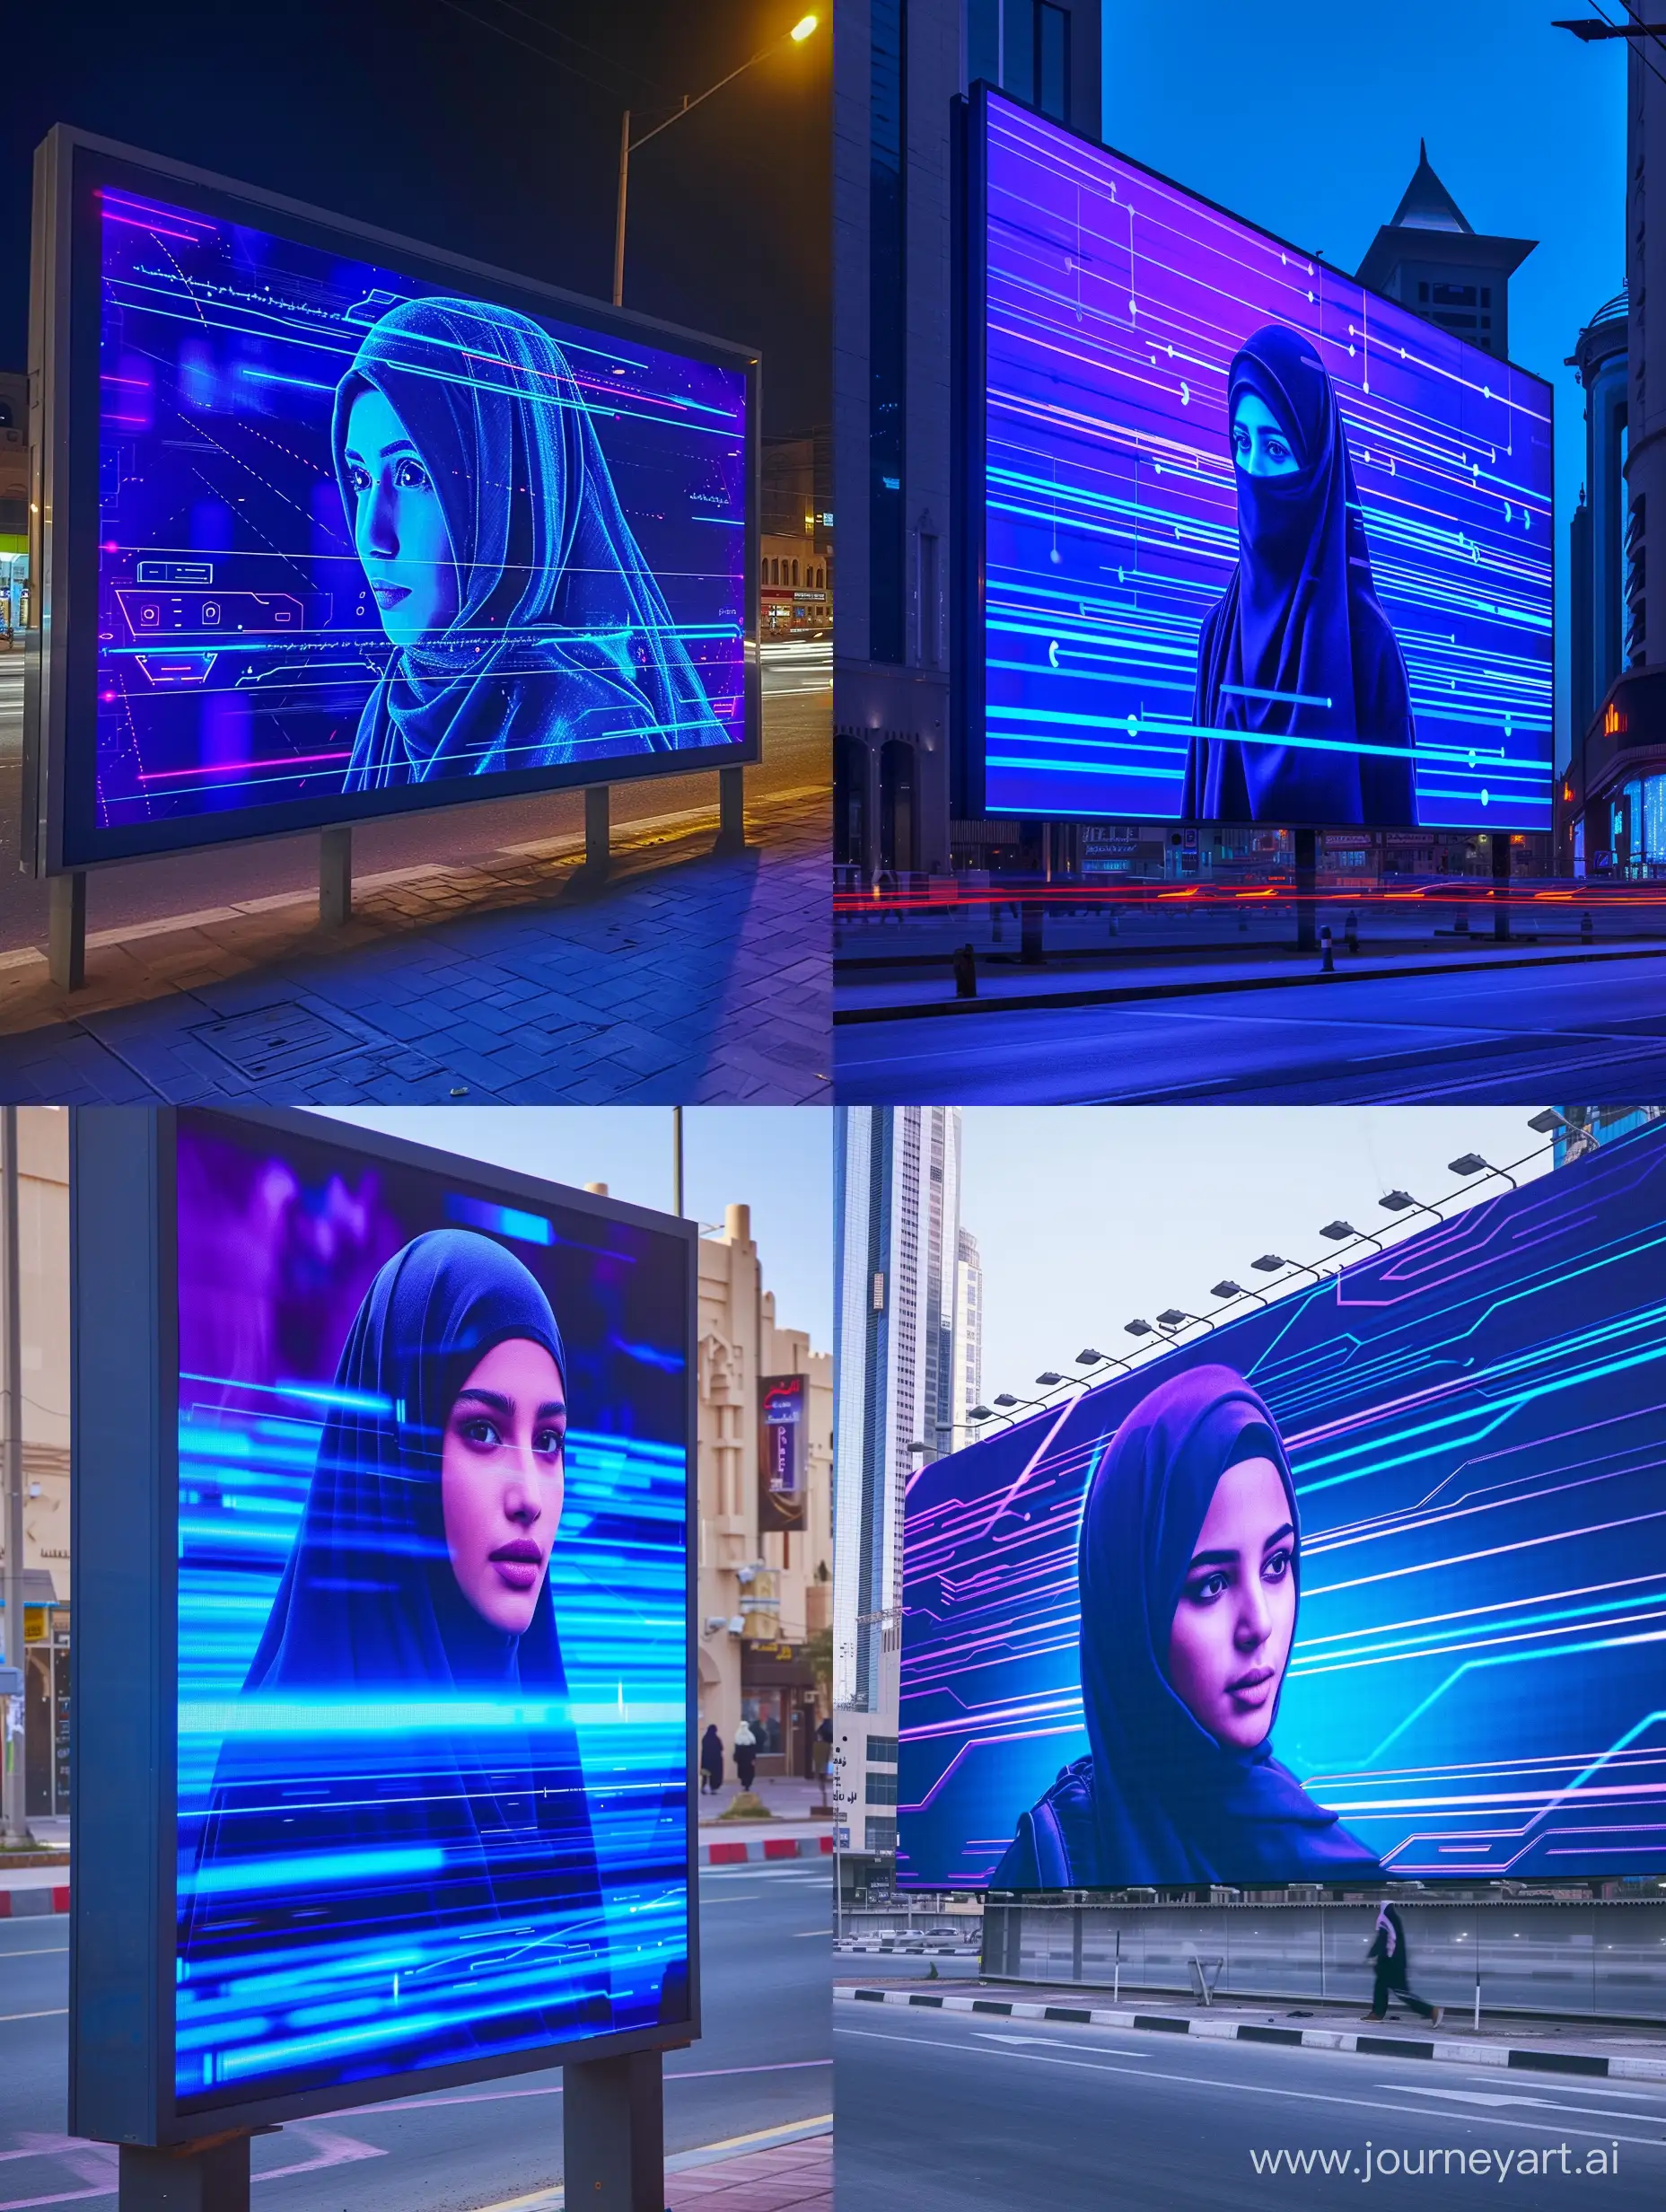 An advertising screen on the street in the city of Riyadh, in blue and purple, with an Arab model wearing a hijab and lines for speed and technology in blue and purple.